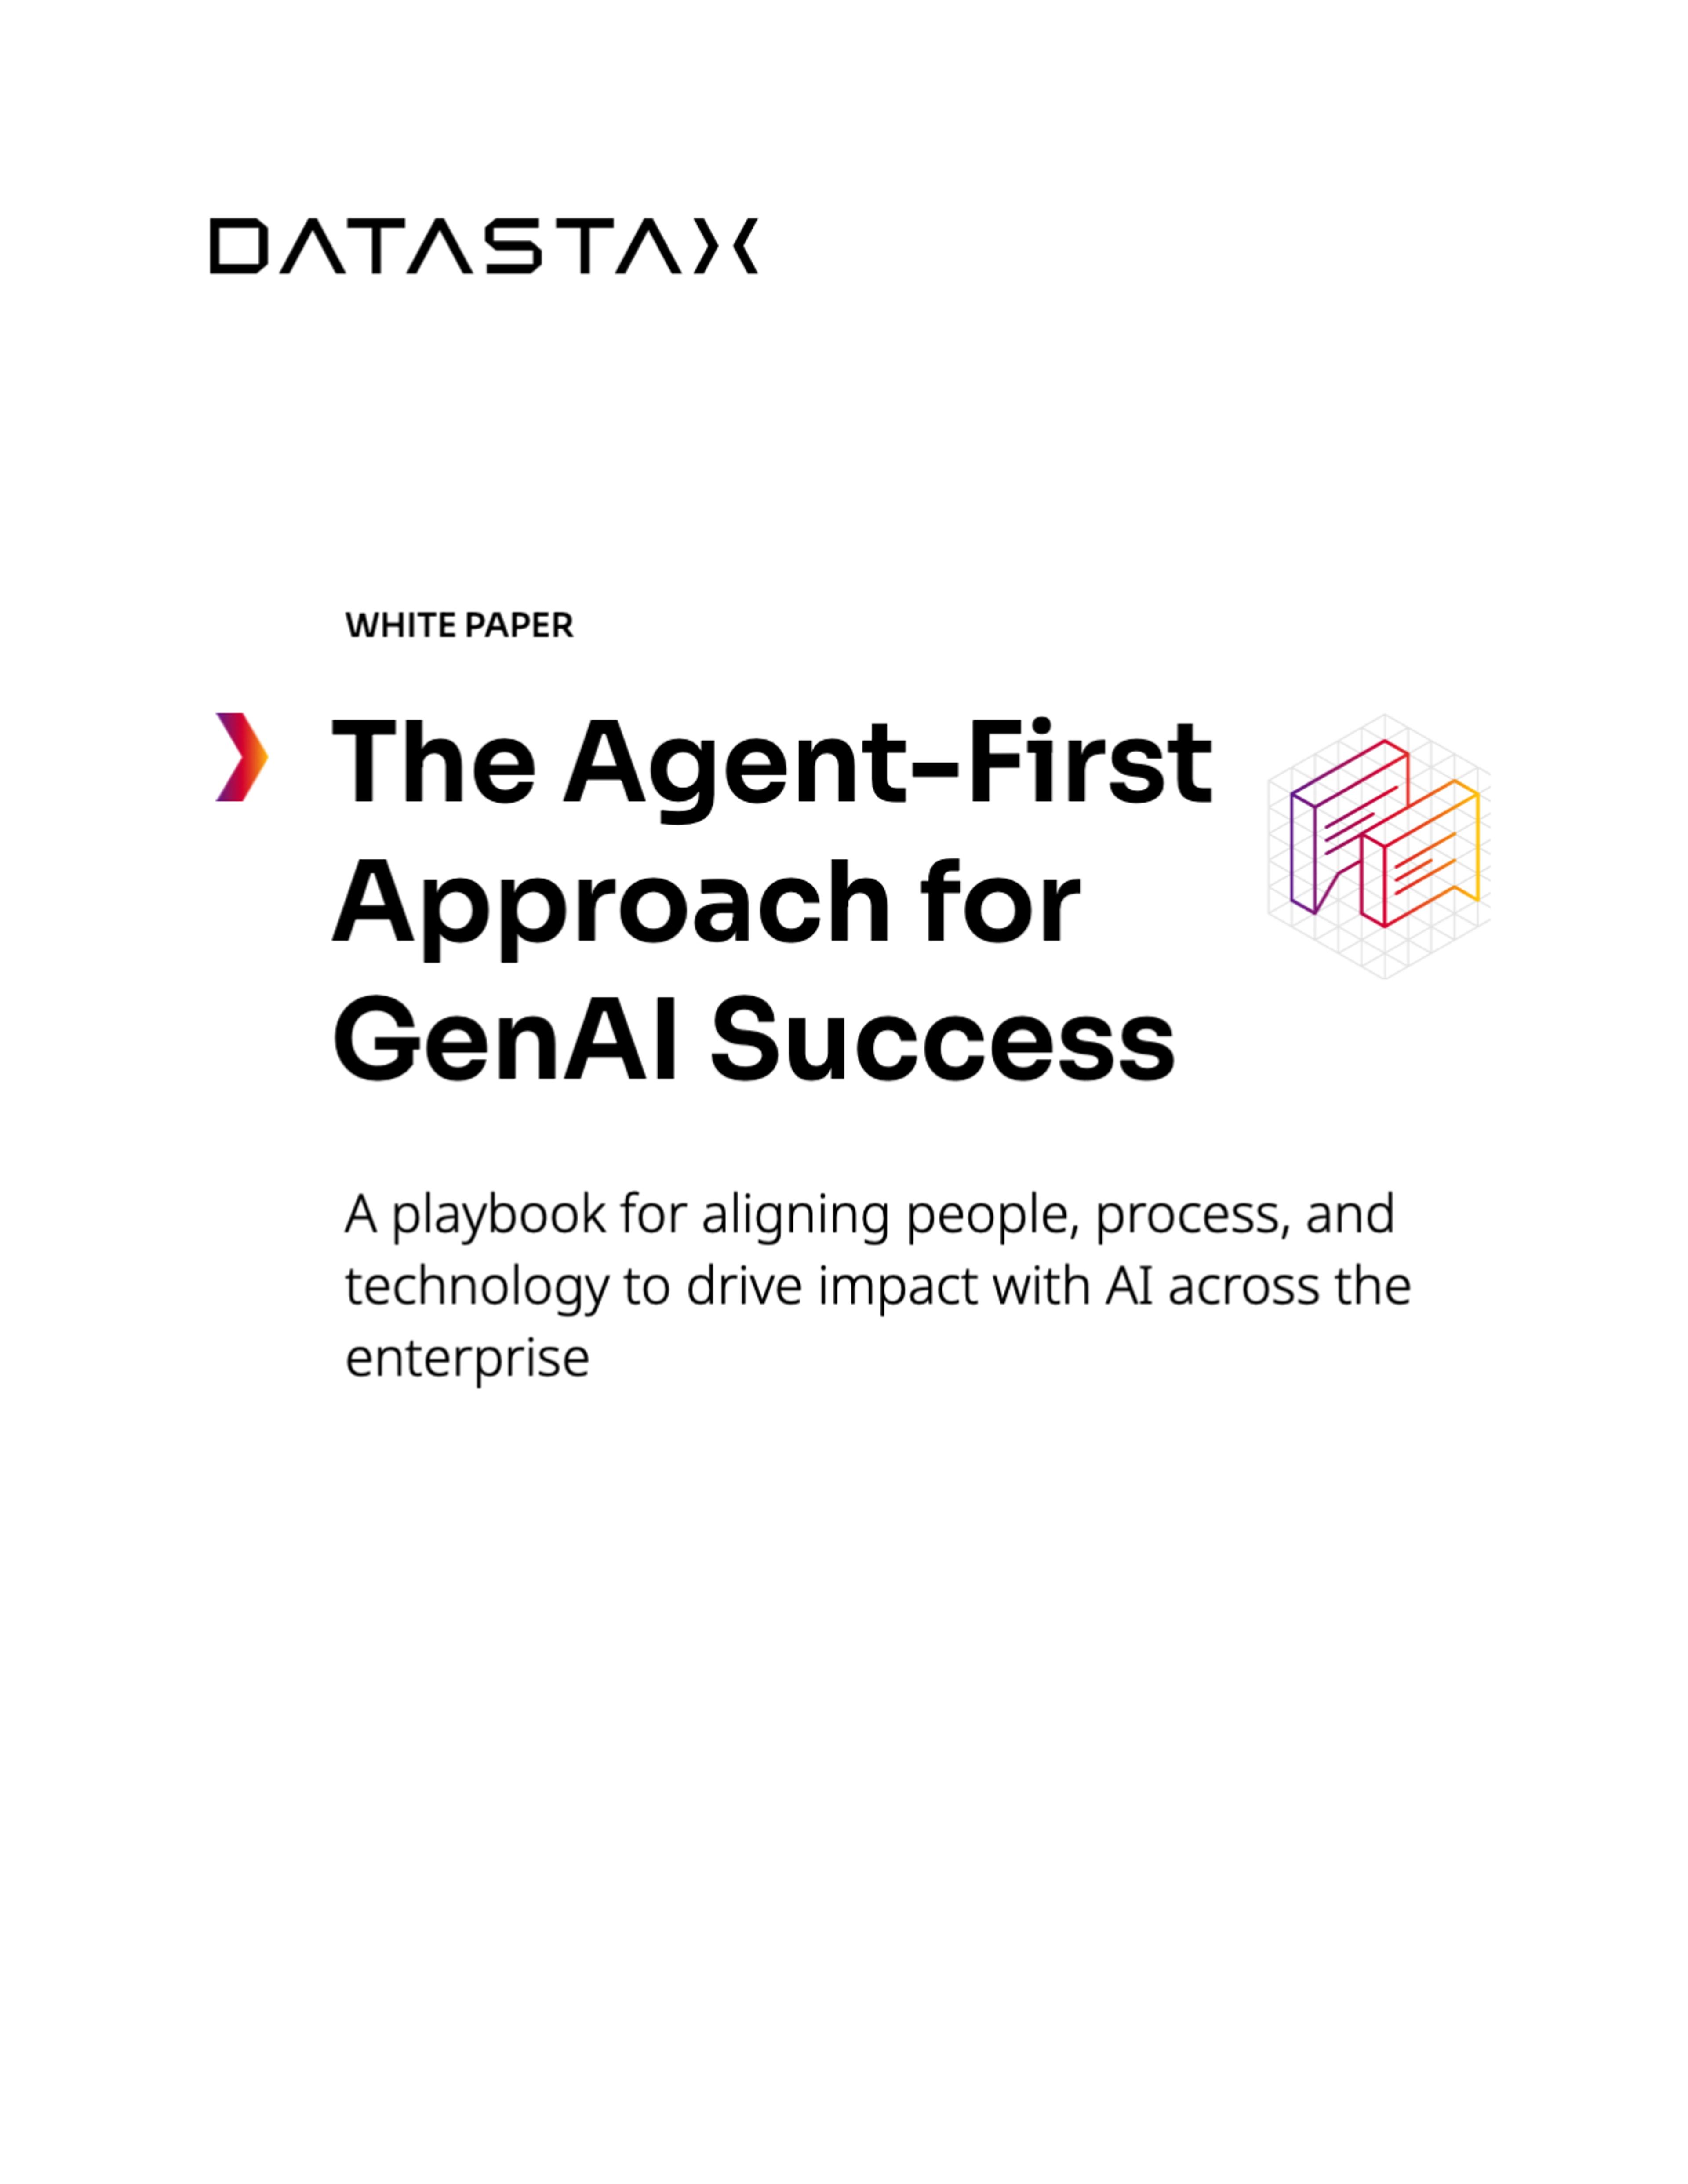 The Agent-First Approach for GenAI Success